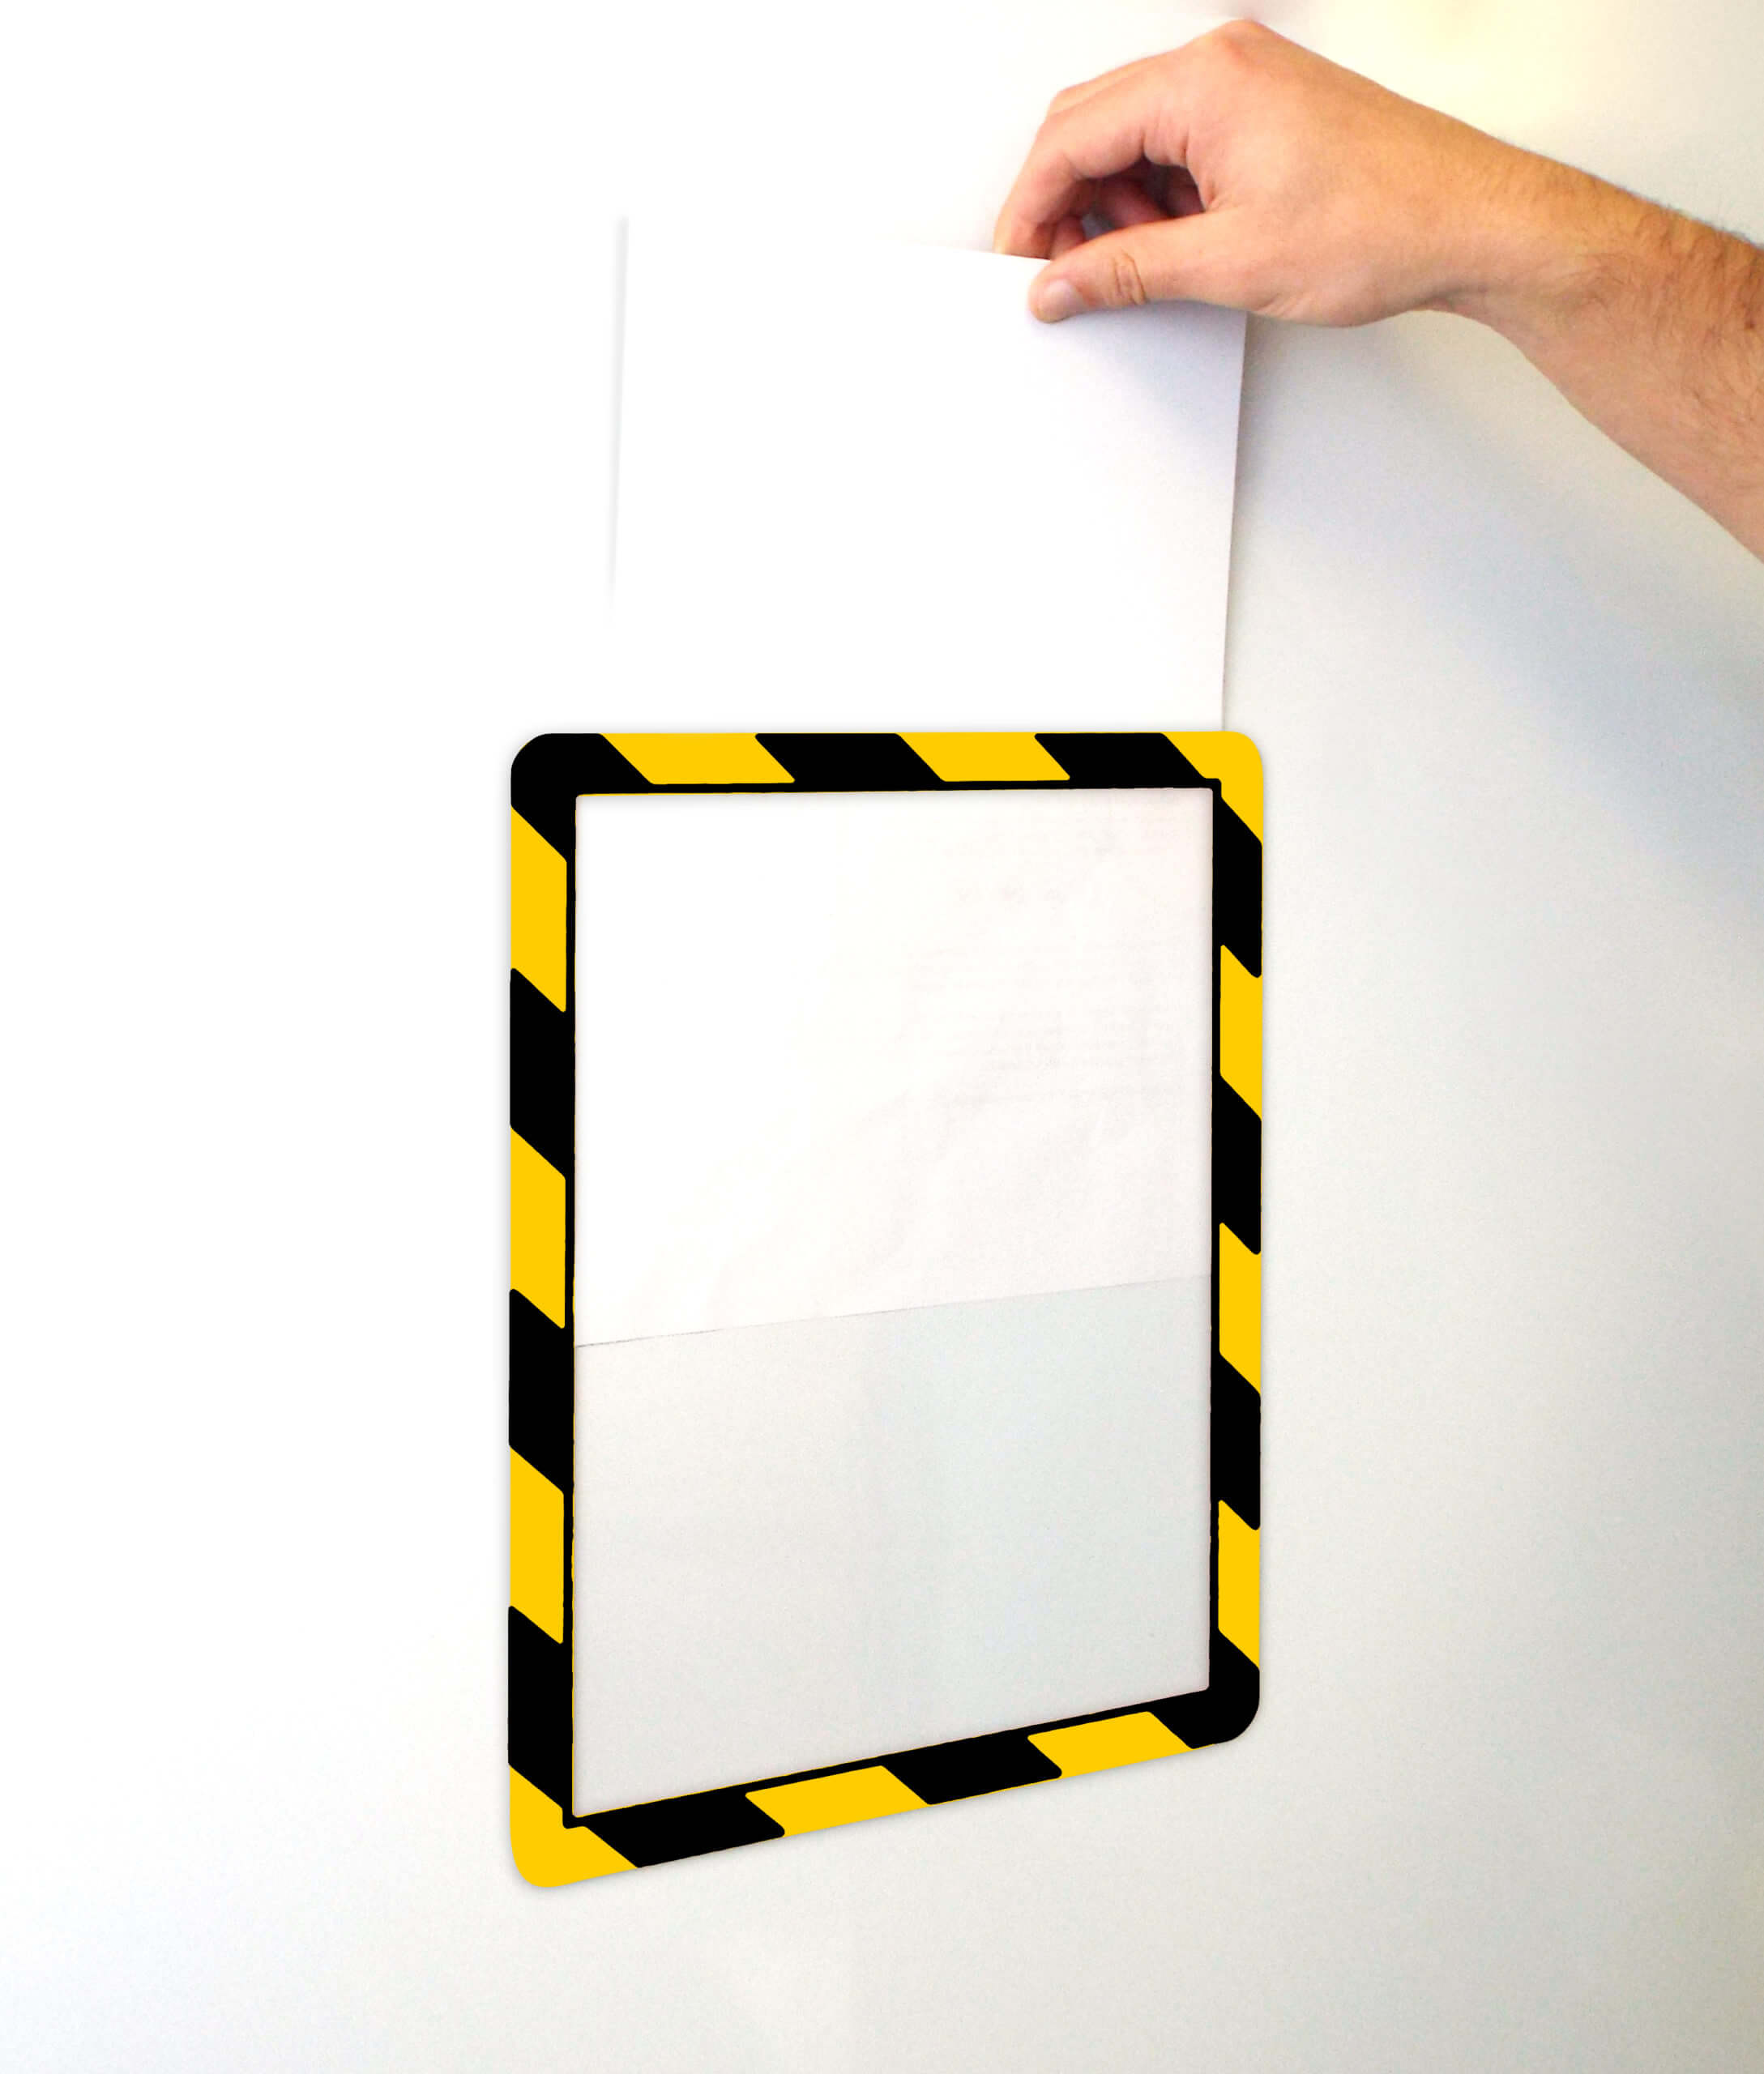 A4 Hazard Warning Striped Picture Frame 12 x 8 Photo Document Display Holders 